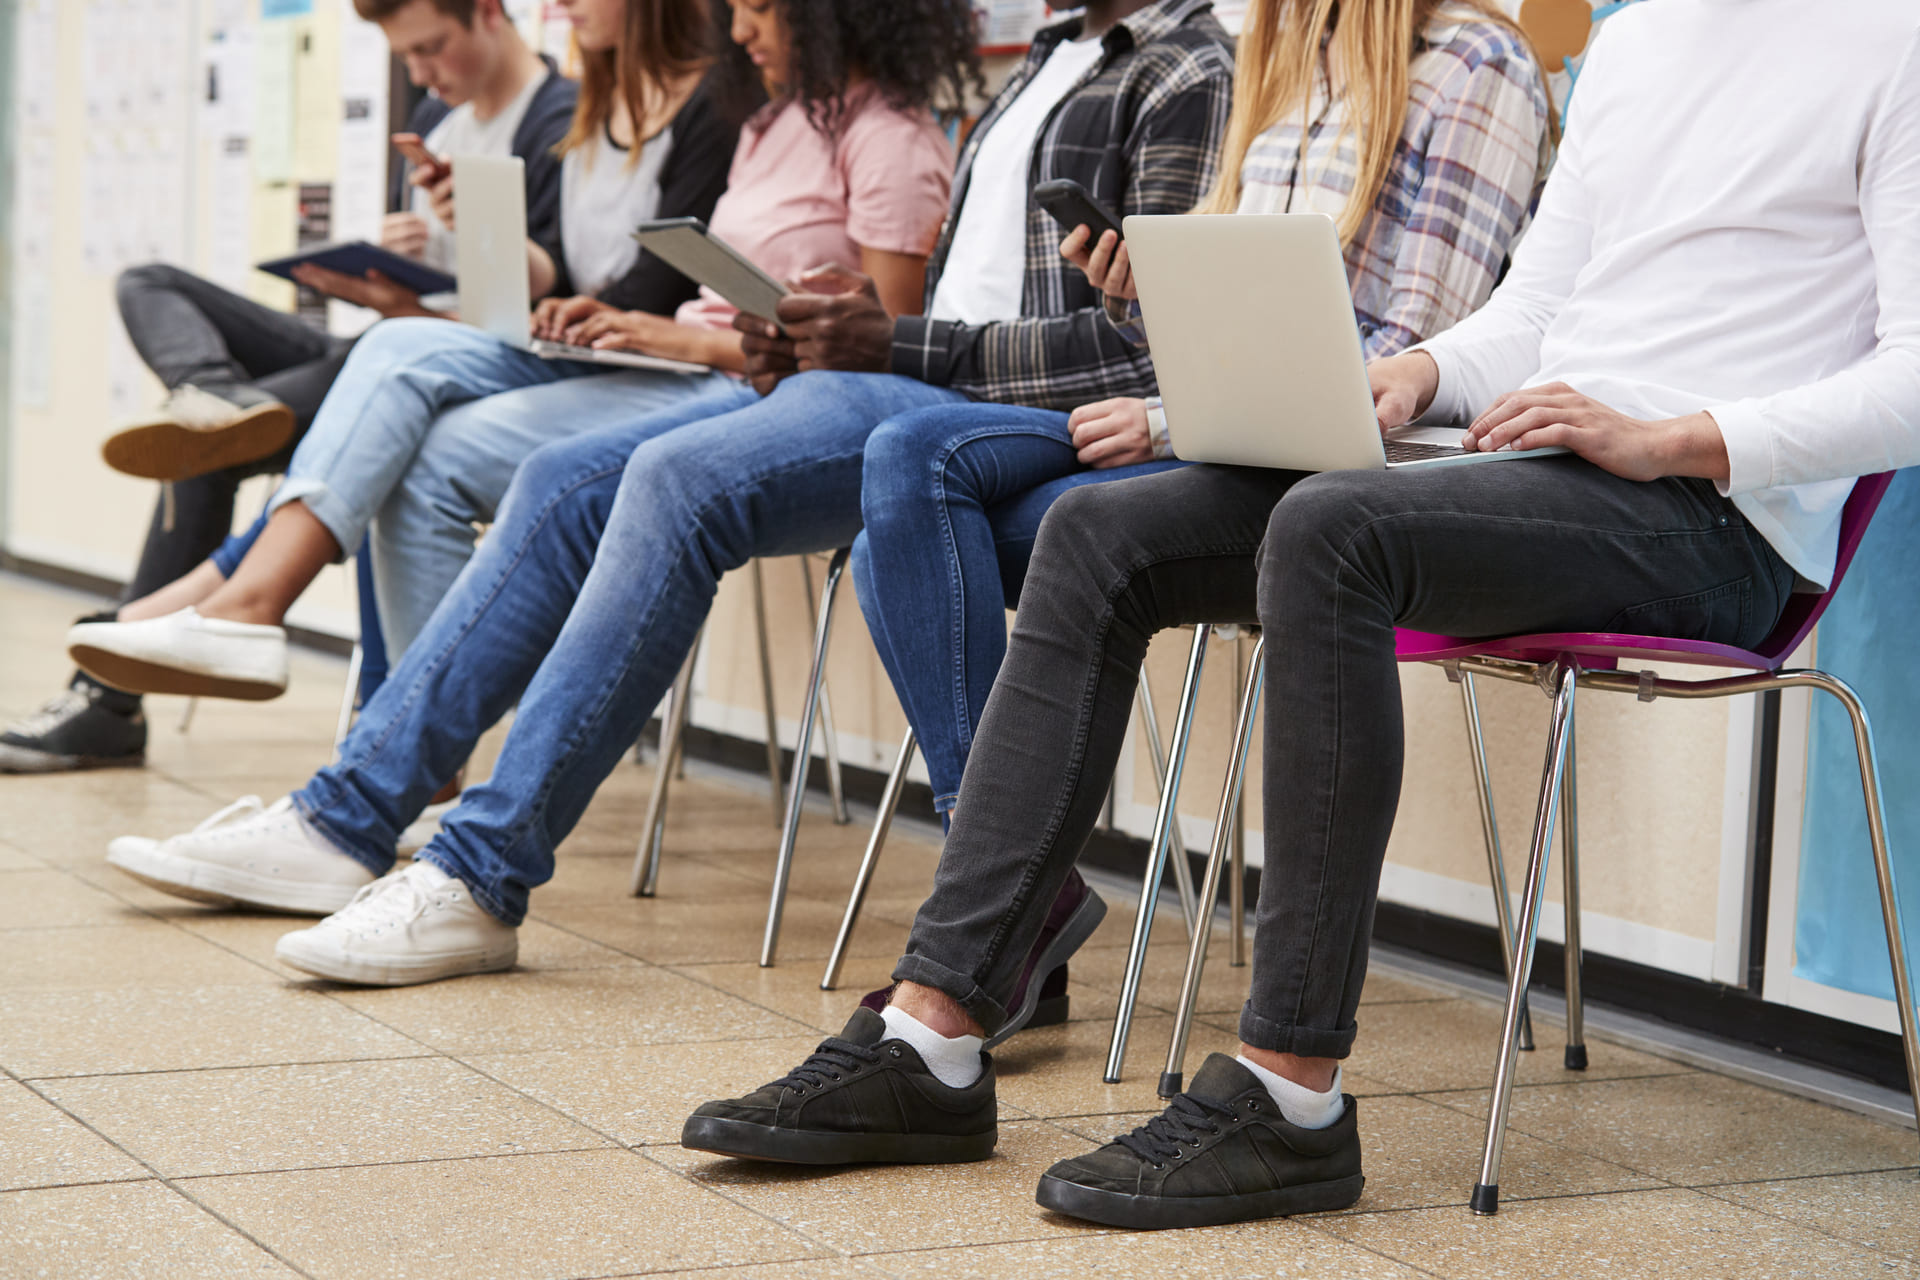 Young people sitting on chairs looking at laptops and phones